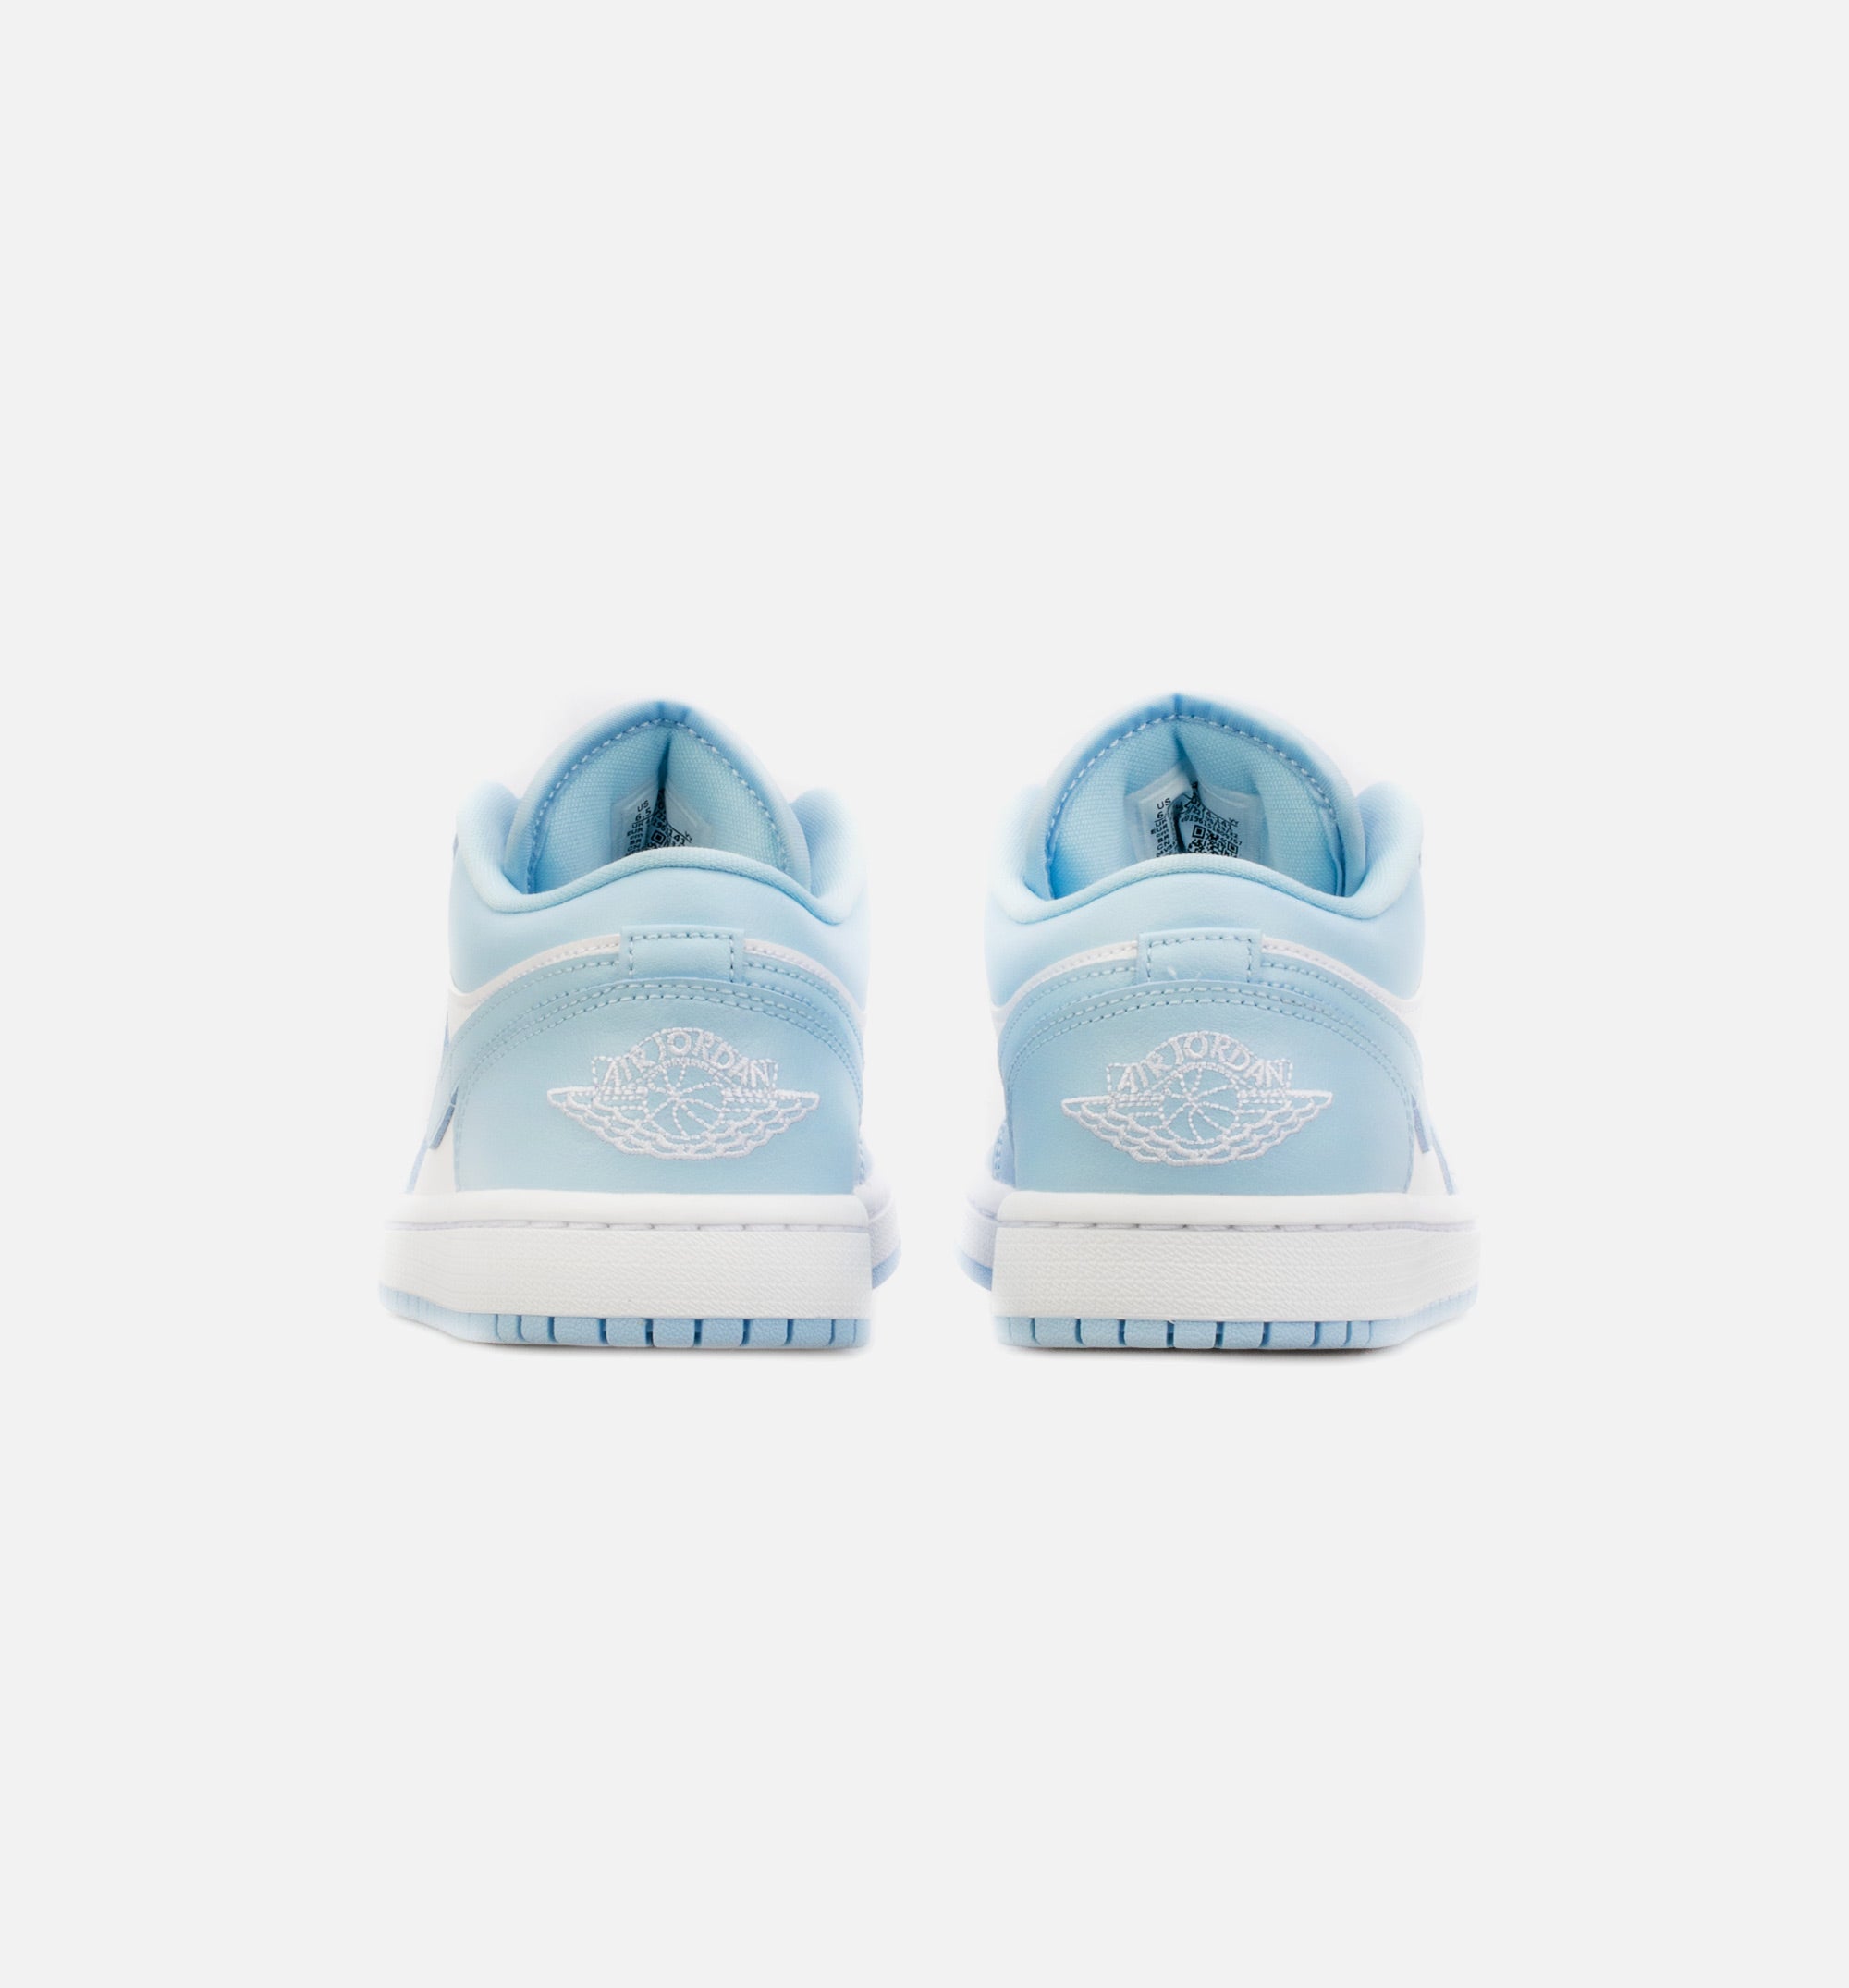 Nike Women Air Force 1 6 IN Boot White / Ice Blue 314389-141 Deadstock